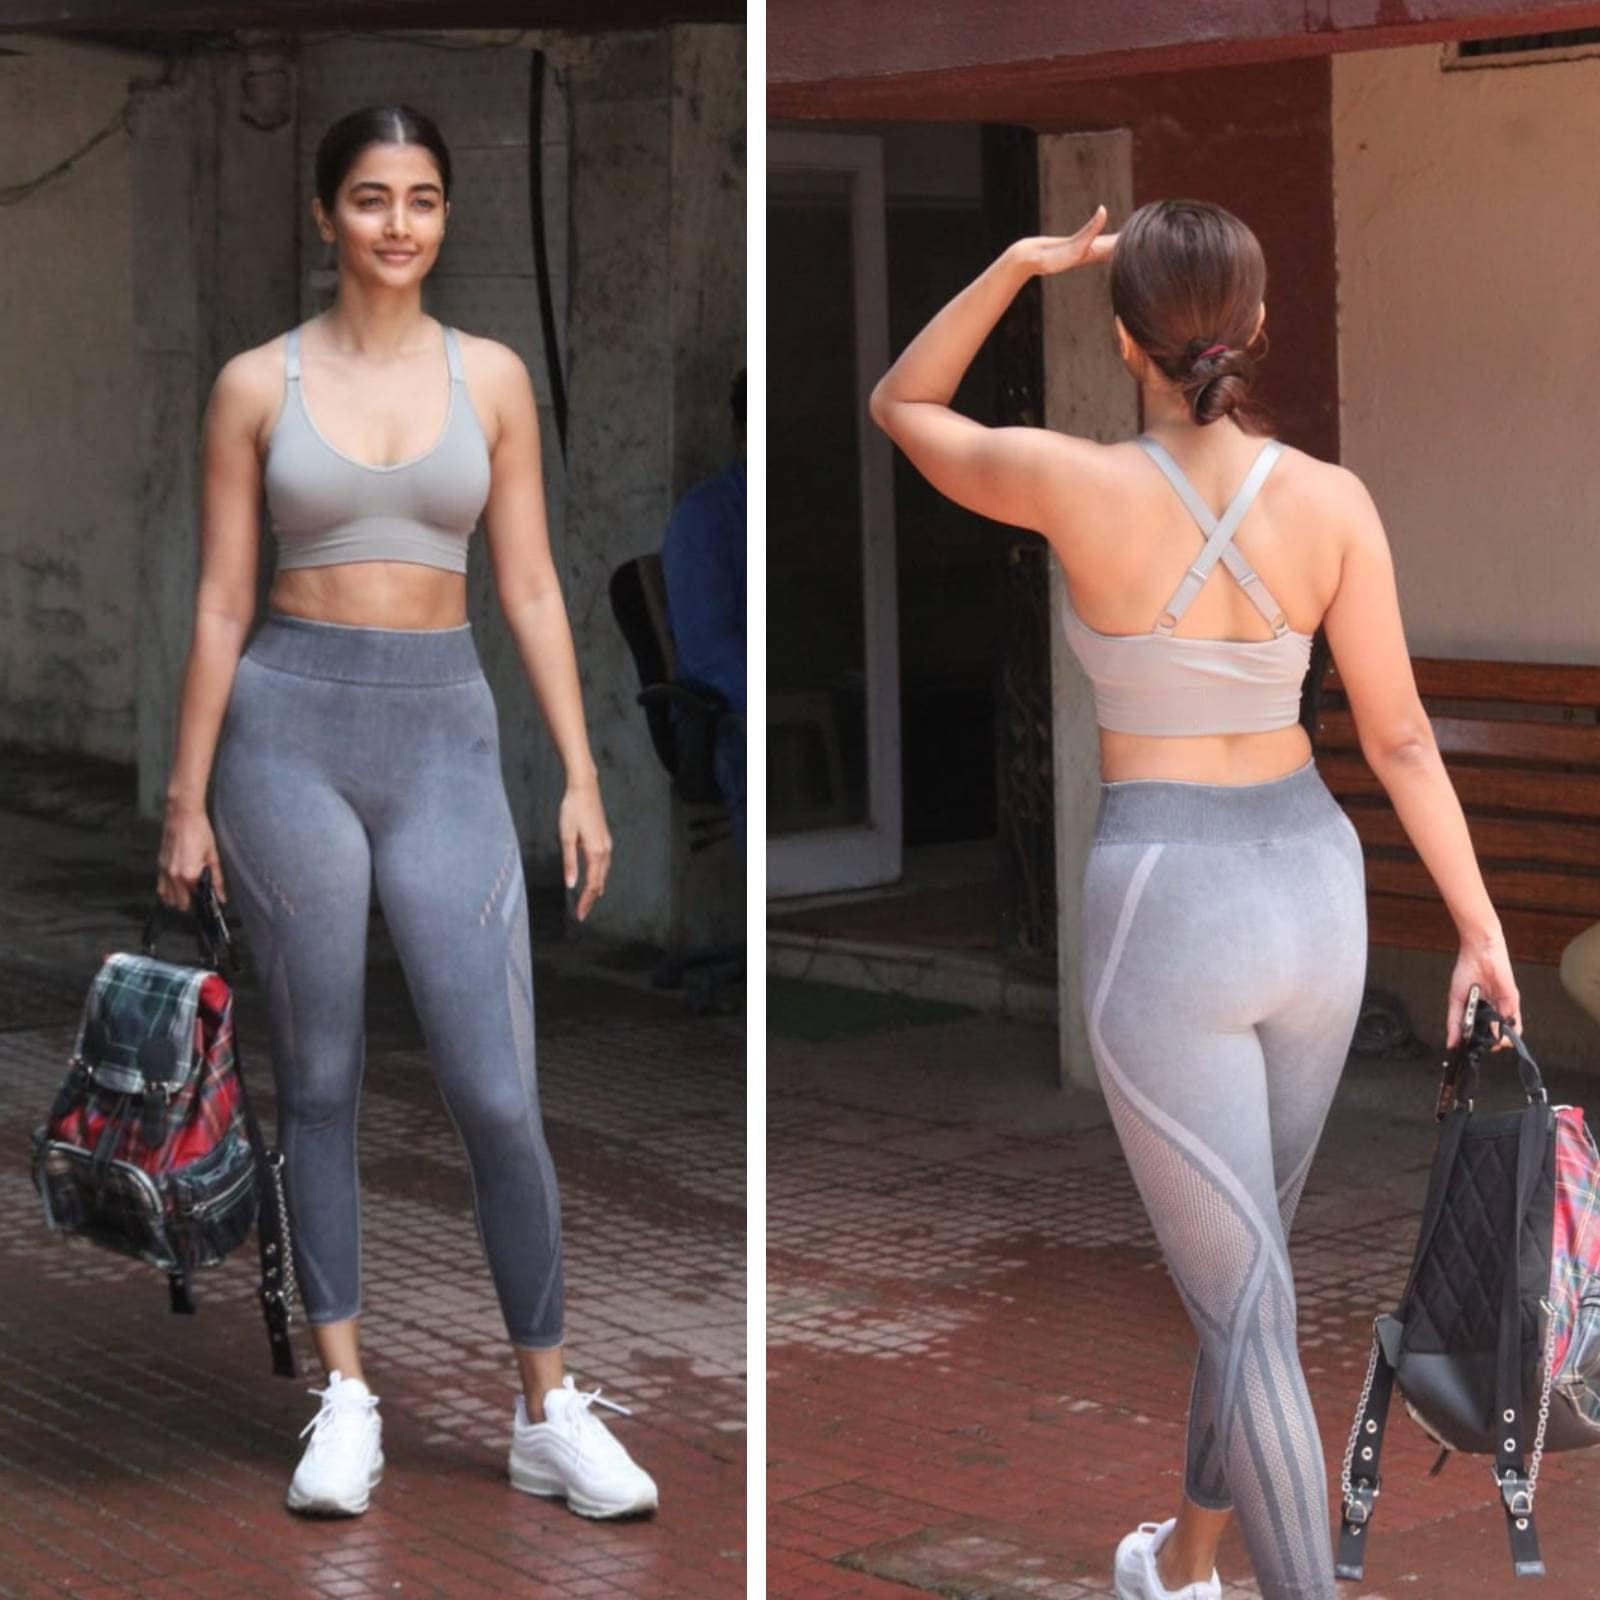 Photostory: Pooja's Flaunts Her Slim & Fit Look IN Tight Gymwear!